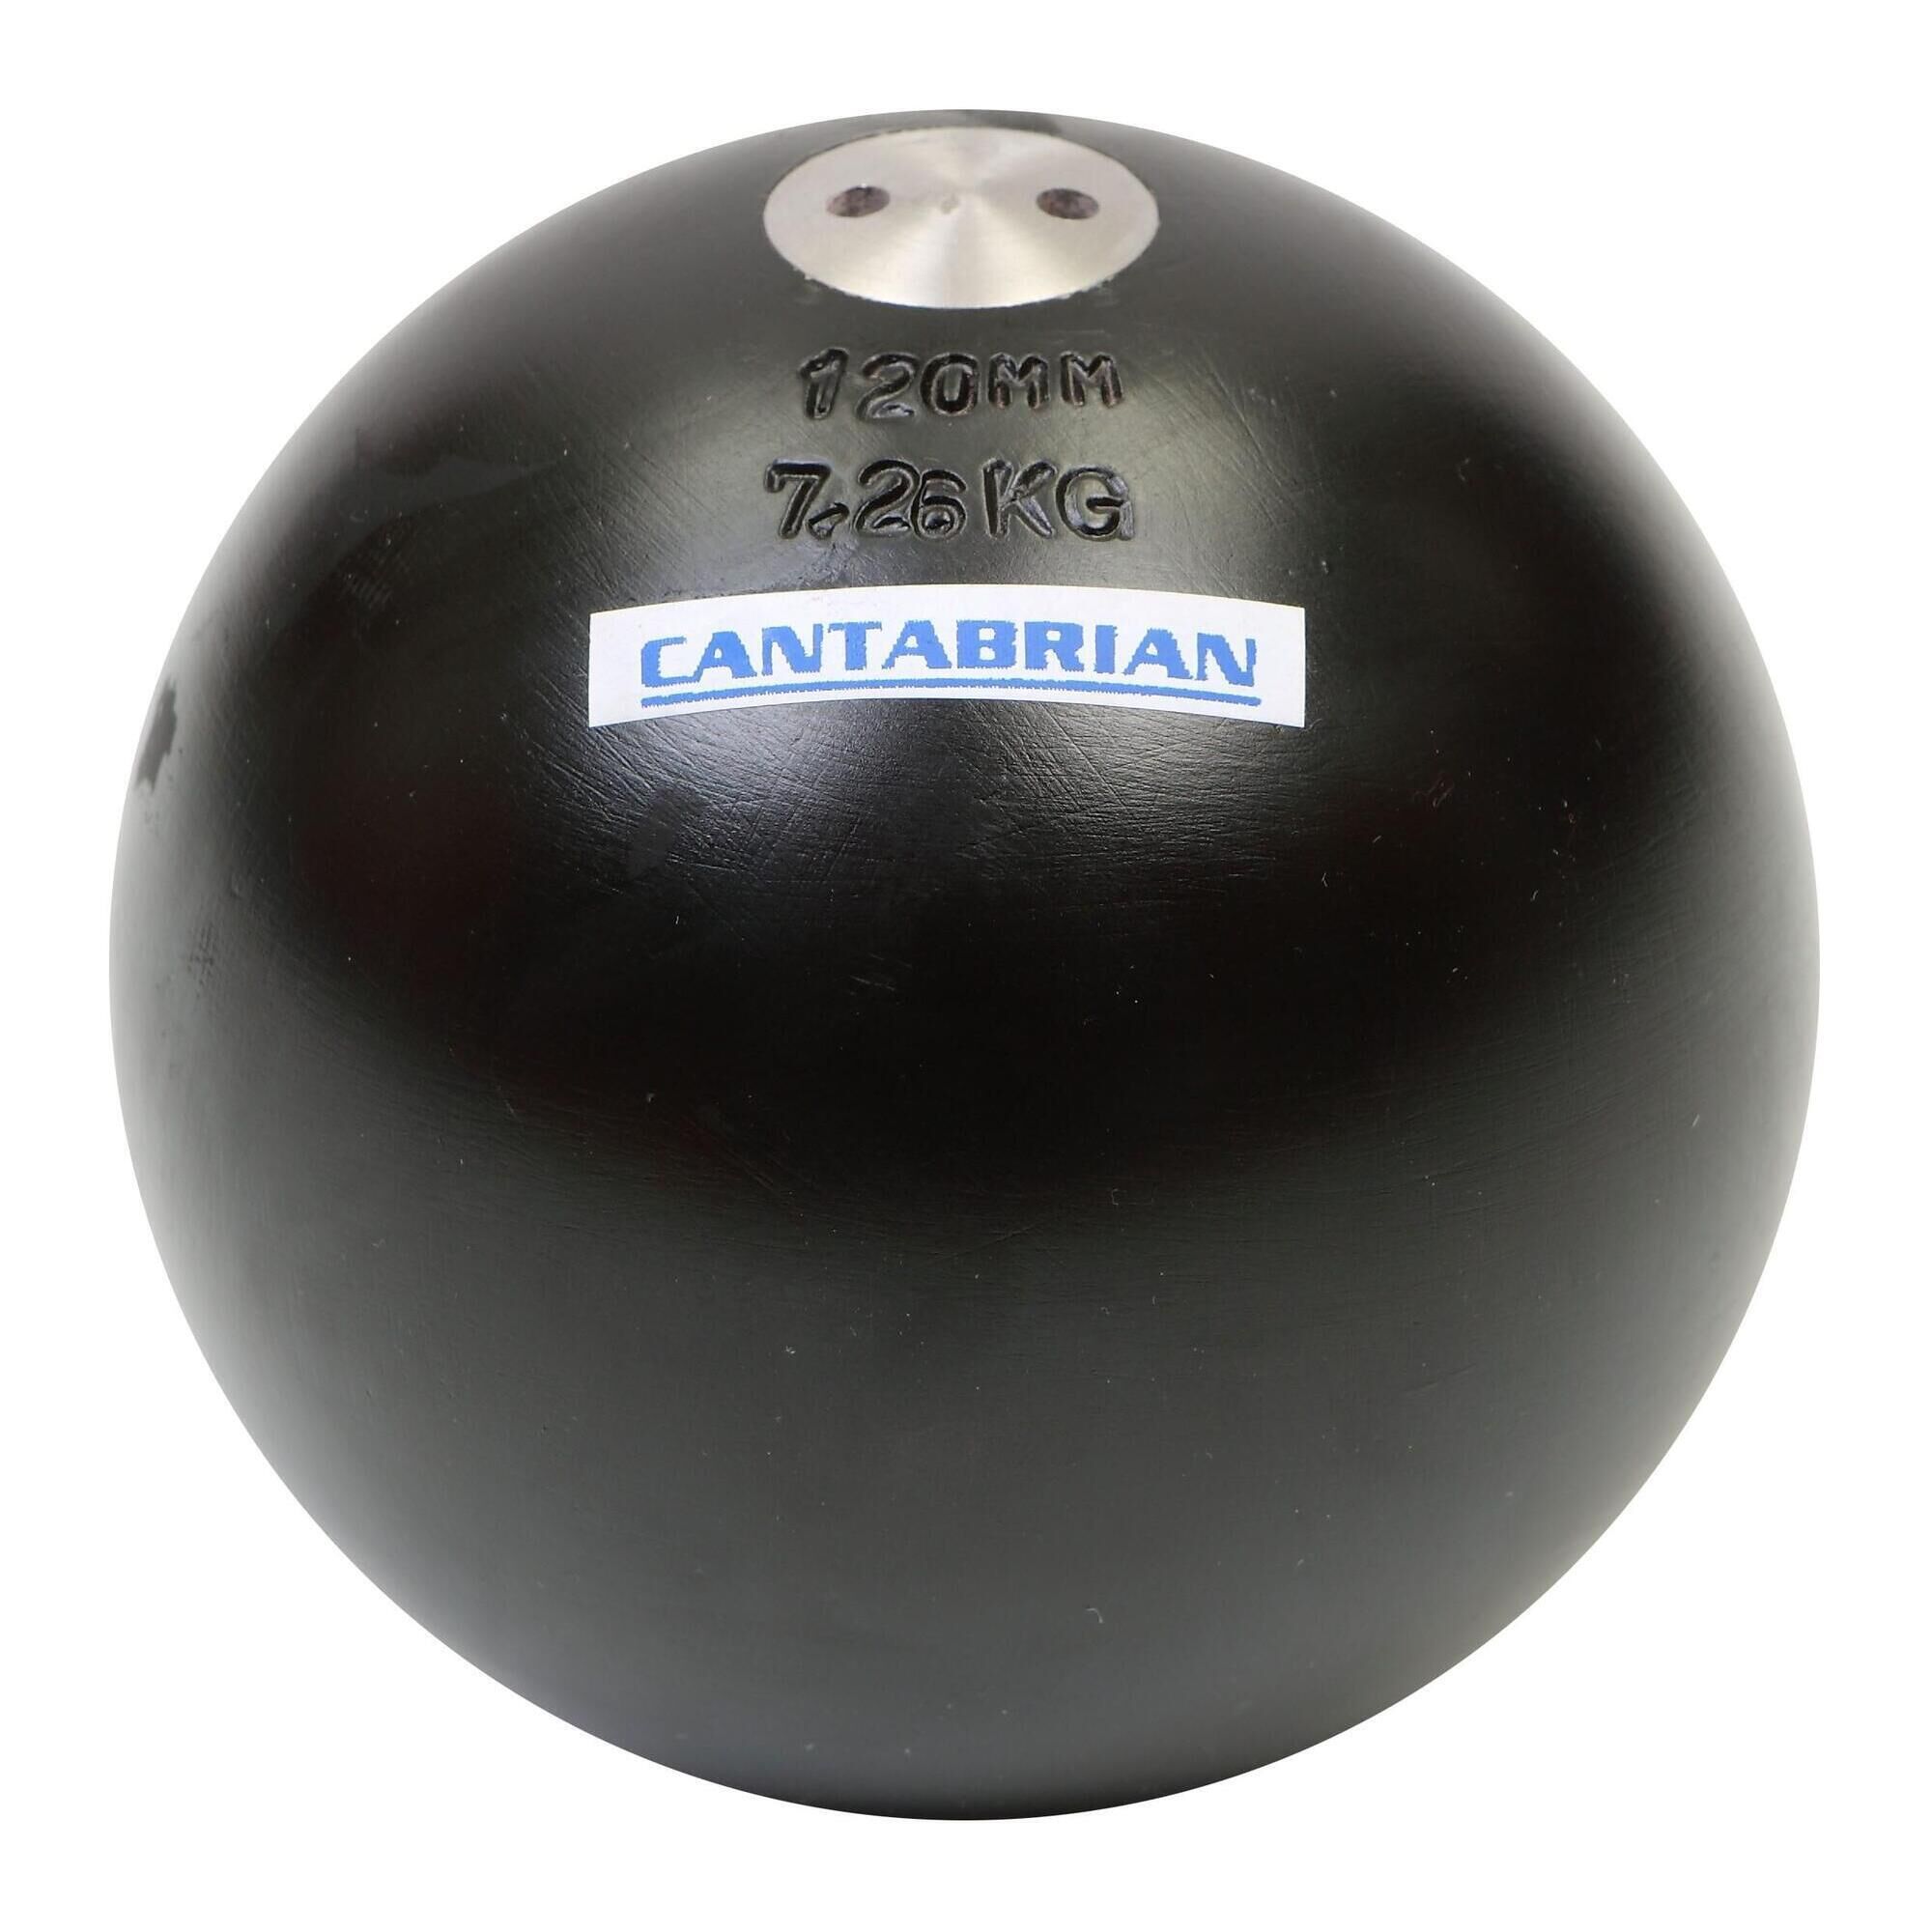 CANTABRIAN Cantabrian Olympic Steel Shot Puts  - 90mm dia